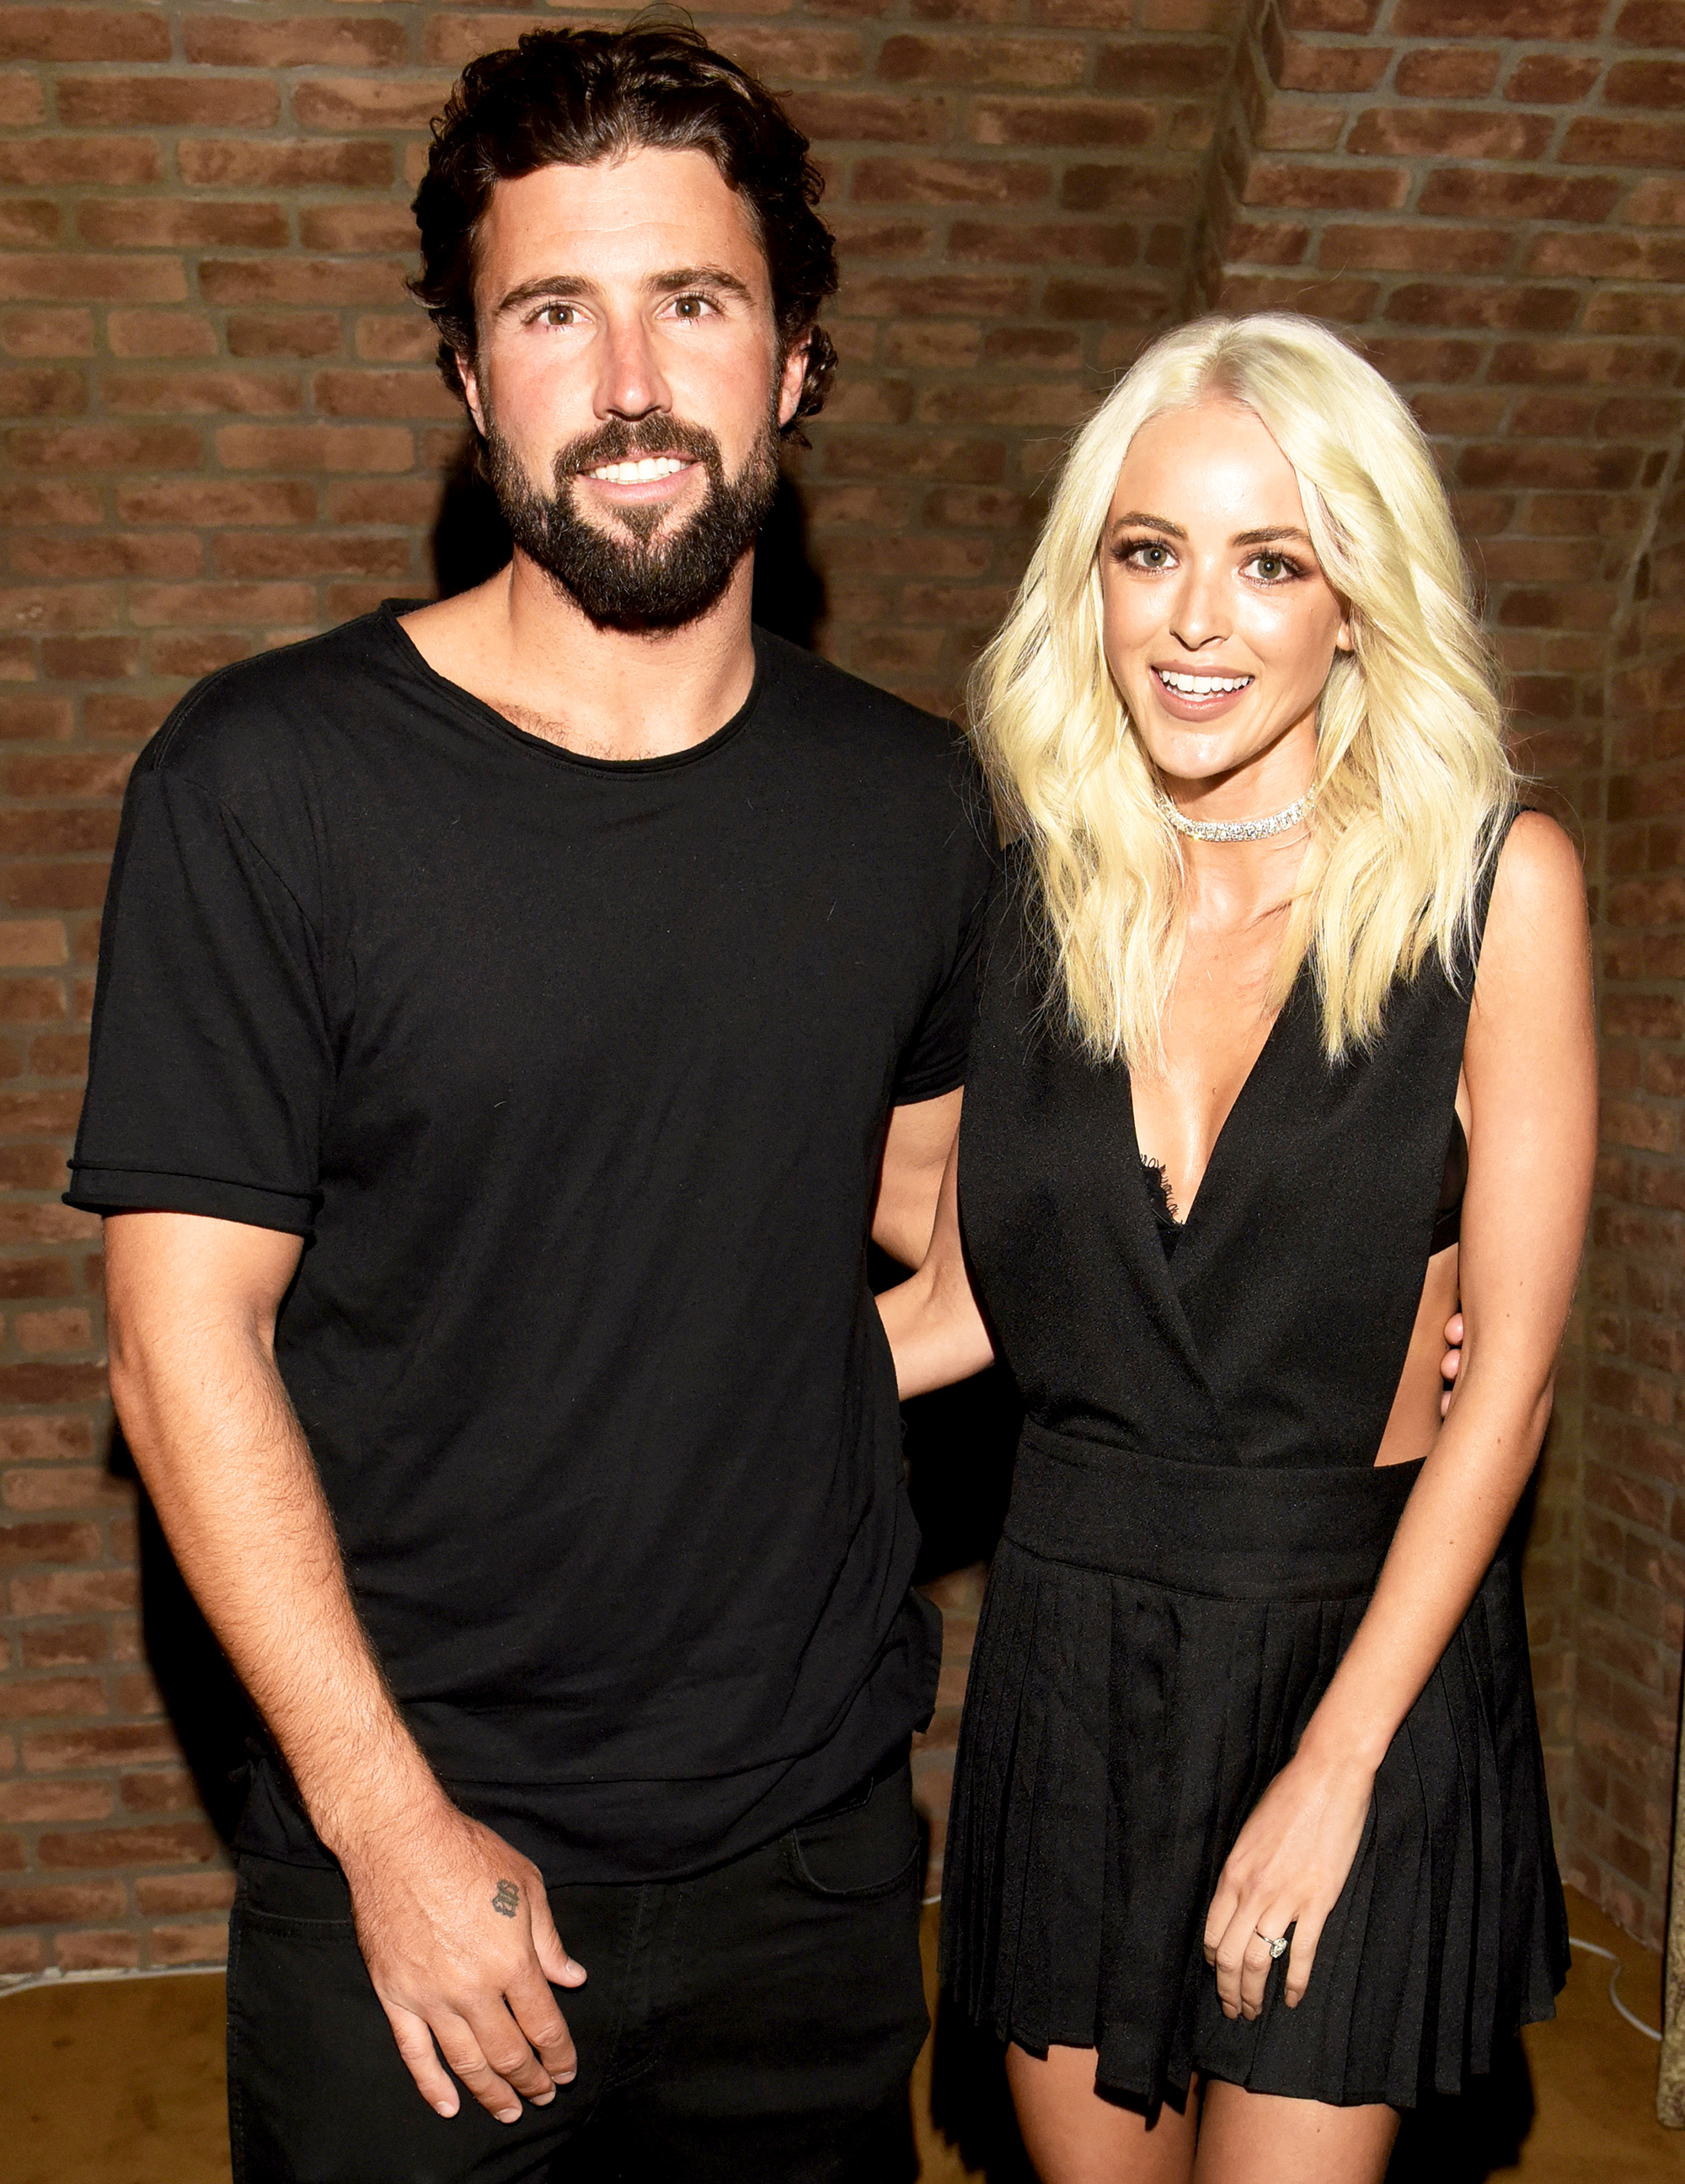 The Hills Brody Jenner Marries Kaitlynn Carter in Indonesia